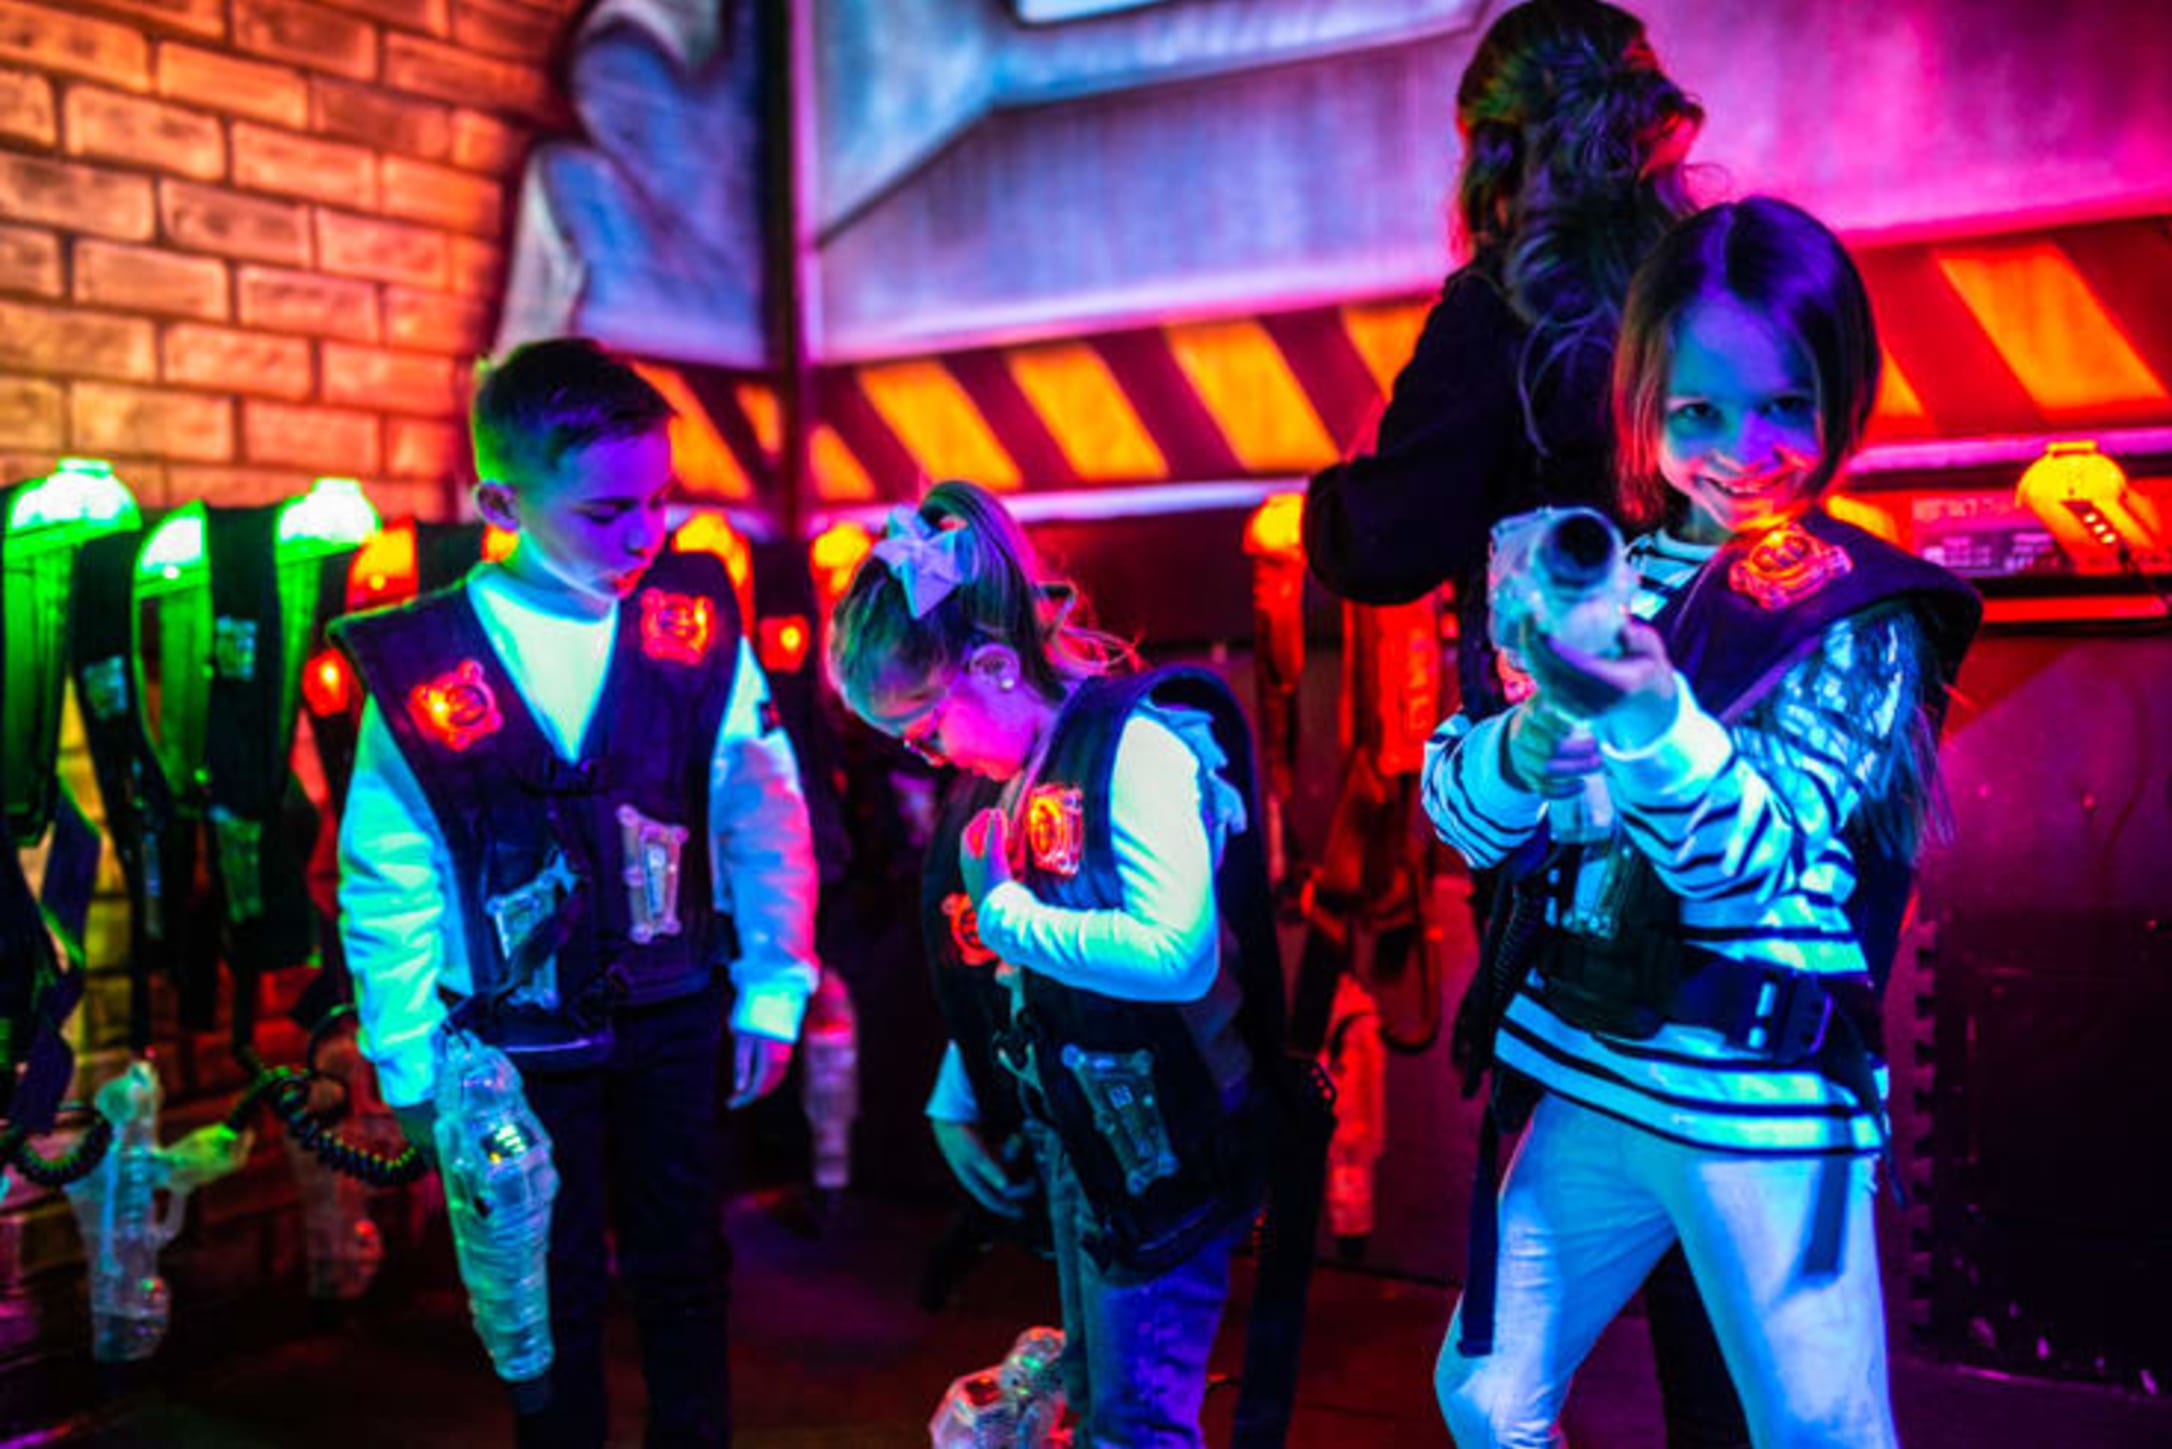 JOIN AN EPIC GLOW-IN-THE-DARK LASER TAG BATTLE